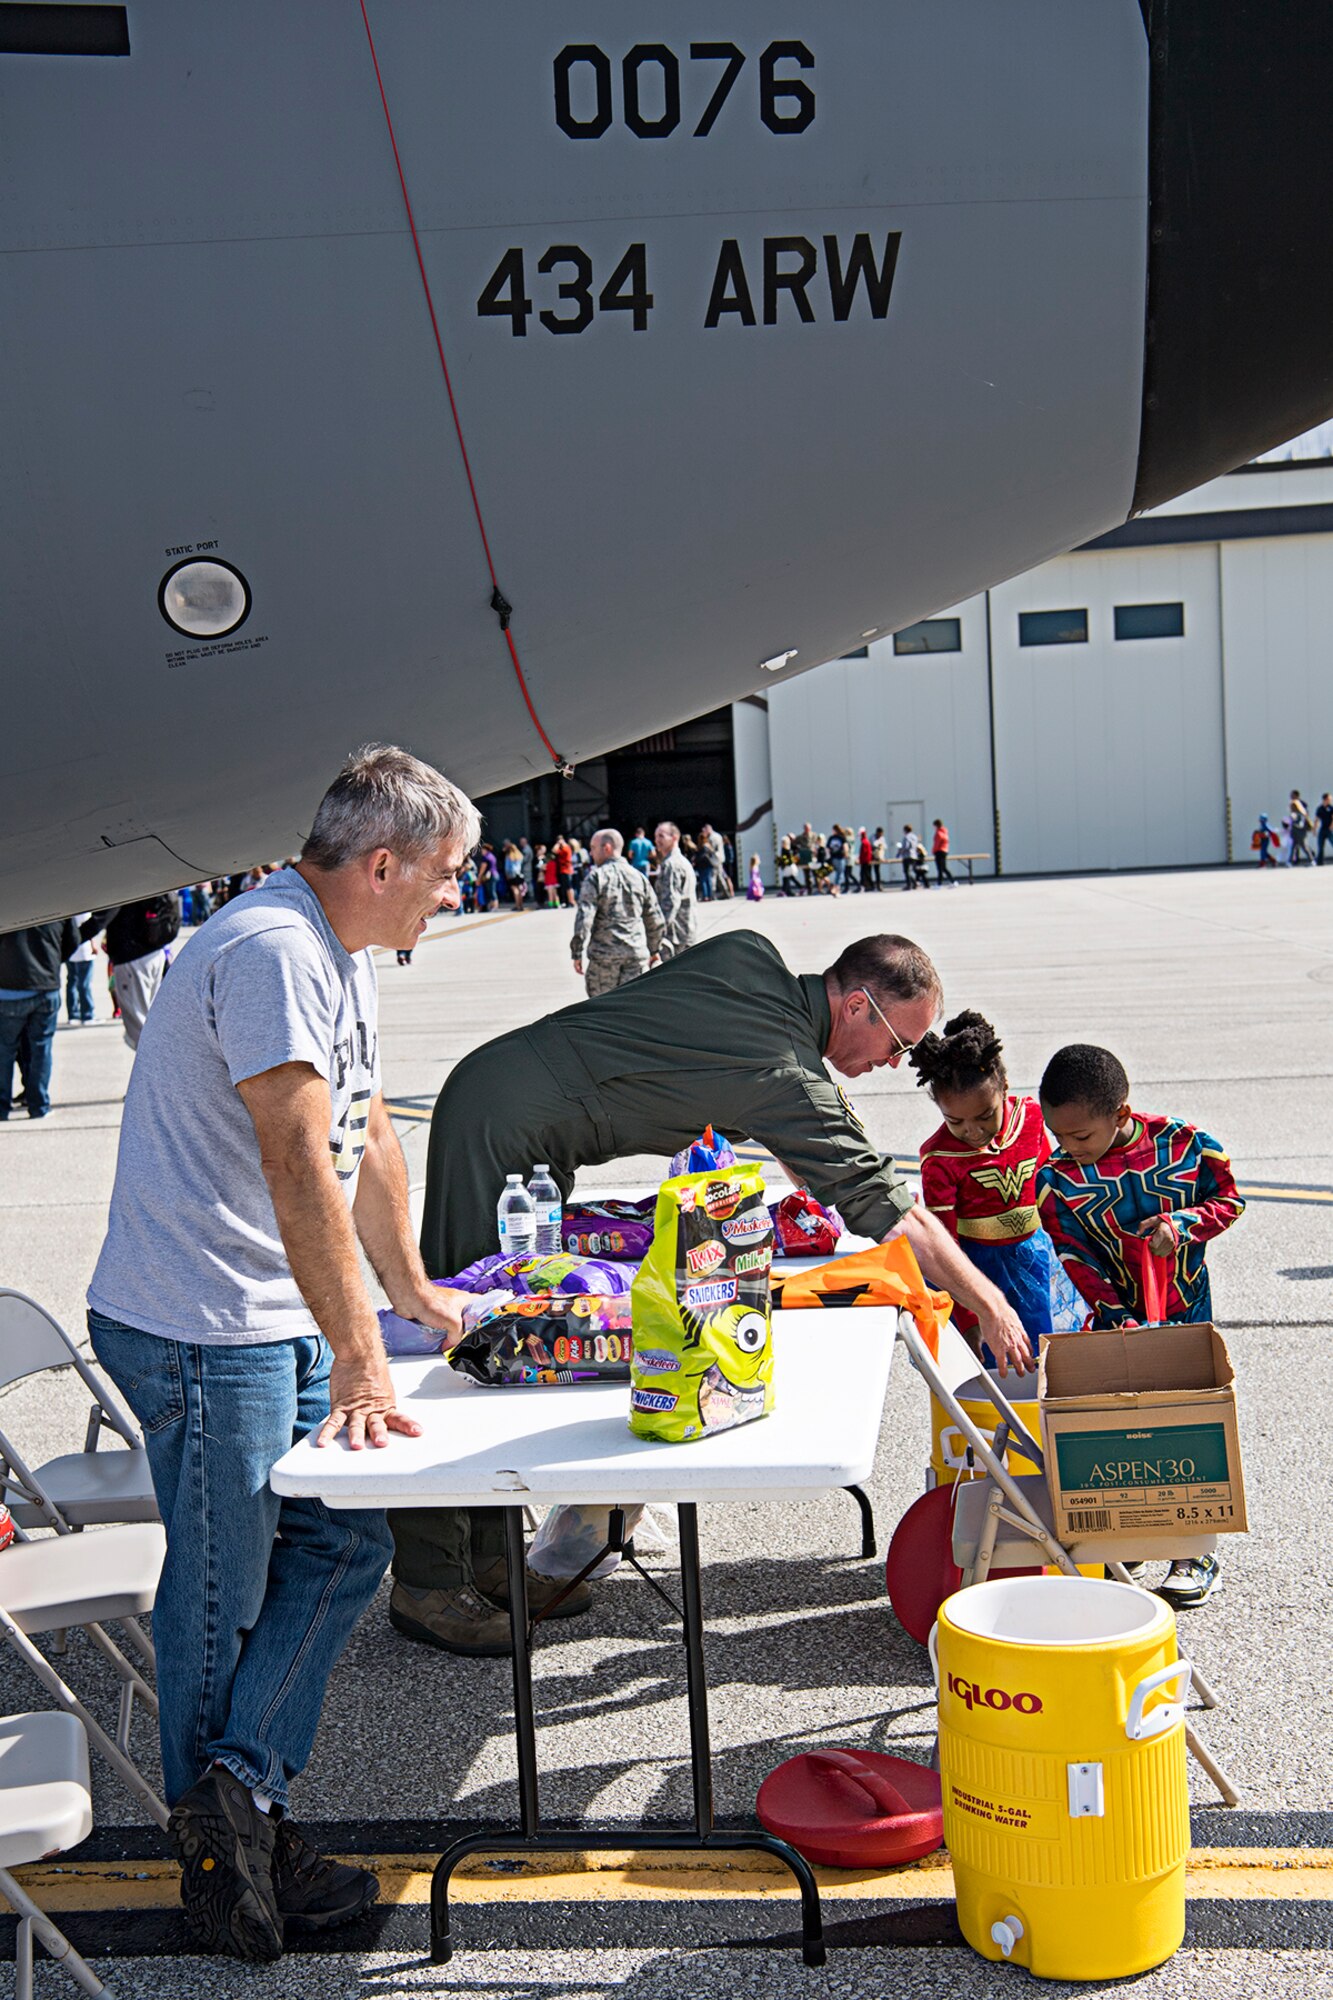 Lt. Col. Doug Perry, 434th Operations Support Squadron, left, and Lt. Col. Joe Austin, 72nd Air Refueling Squadron, help some young super heroes get candy Oct. 6, 2019 during a ‘Tanker Treat’ held during a fall festival at Grissom Air Reserve Base, Indiana. The festival gave unit members and their families an opportunity to focus on resiliency and throttle back after busy year of deployments, exercises, inspections and an airshow. (U.S. Air Force photo/Douglas Hays)